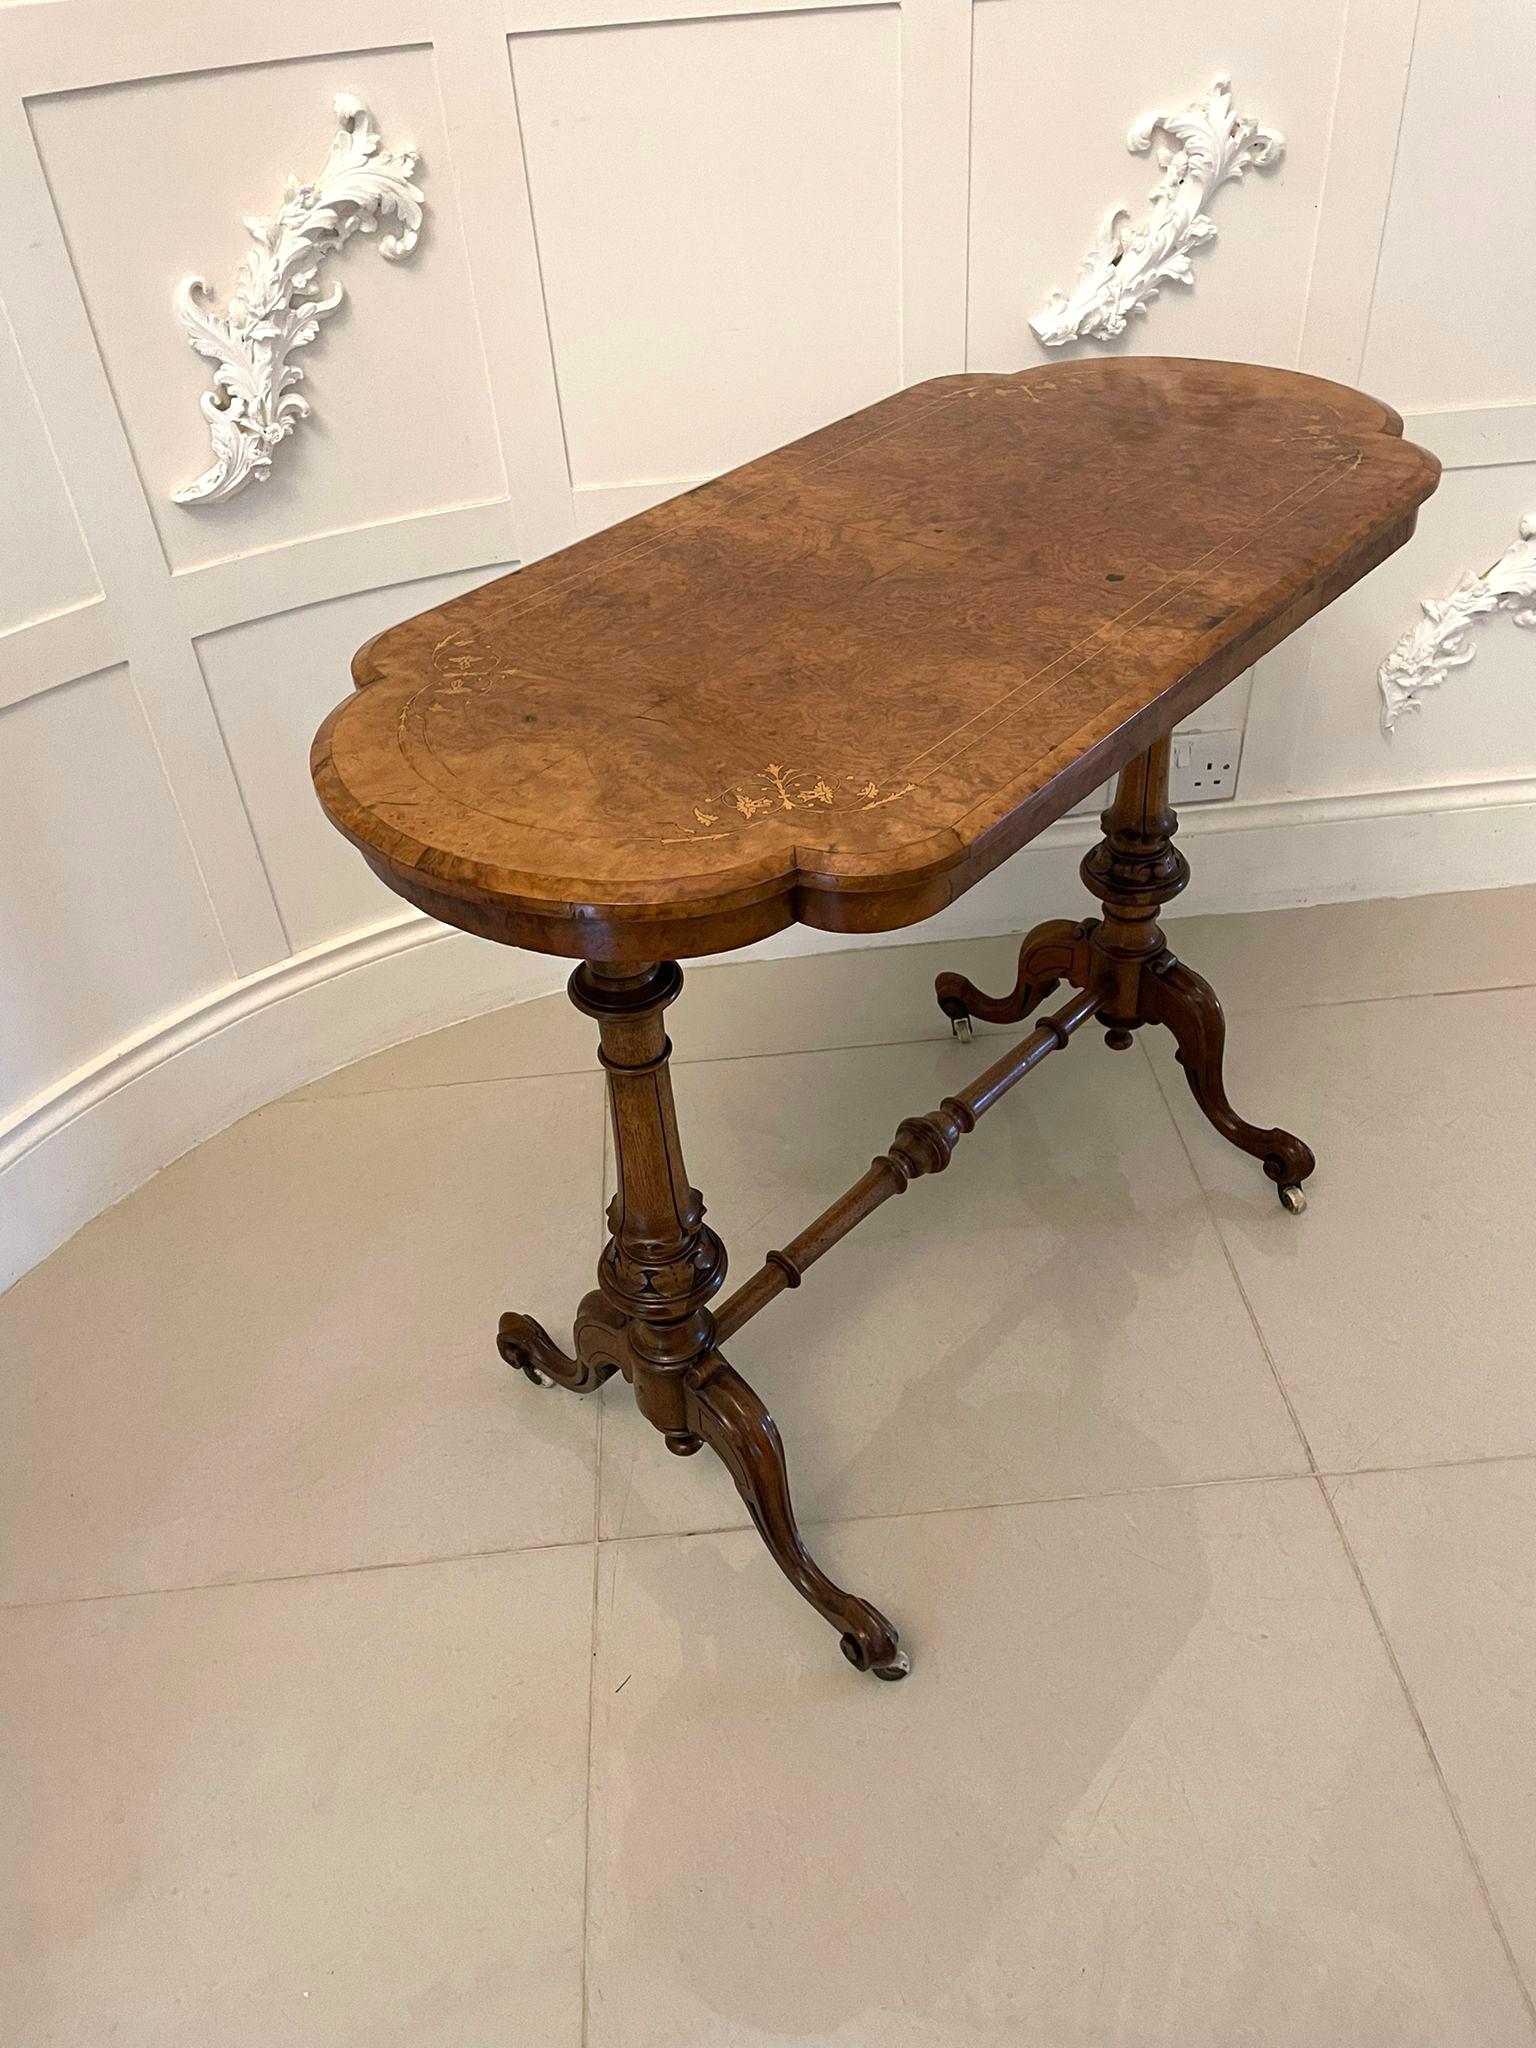 Antique Victorian quality burr walnut inlaid freestanding centre table having a quality attractive inlaid burr walnut shaped top and a moulded edge, shaped frieze supported by two turned carved shaped solid walnut columns standing on four shaped